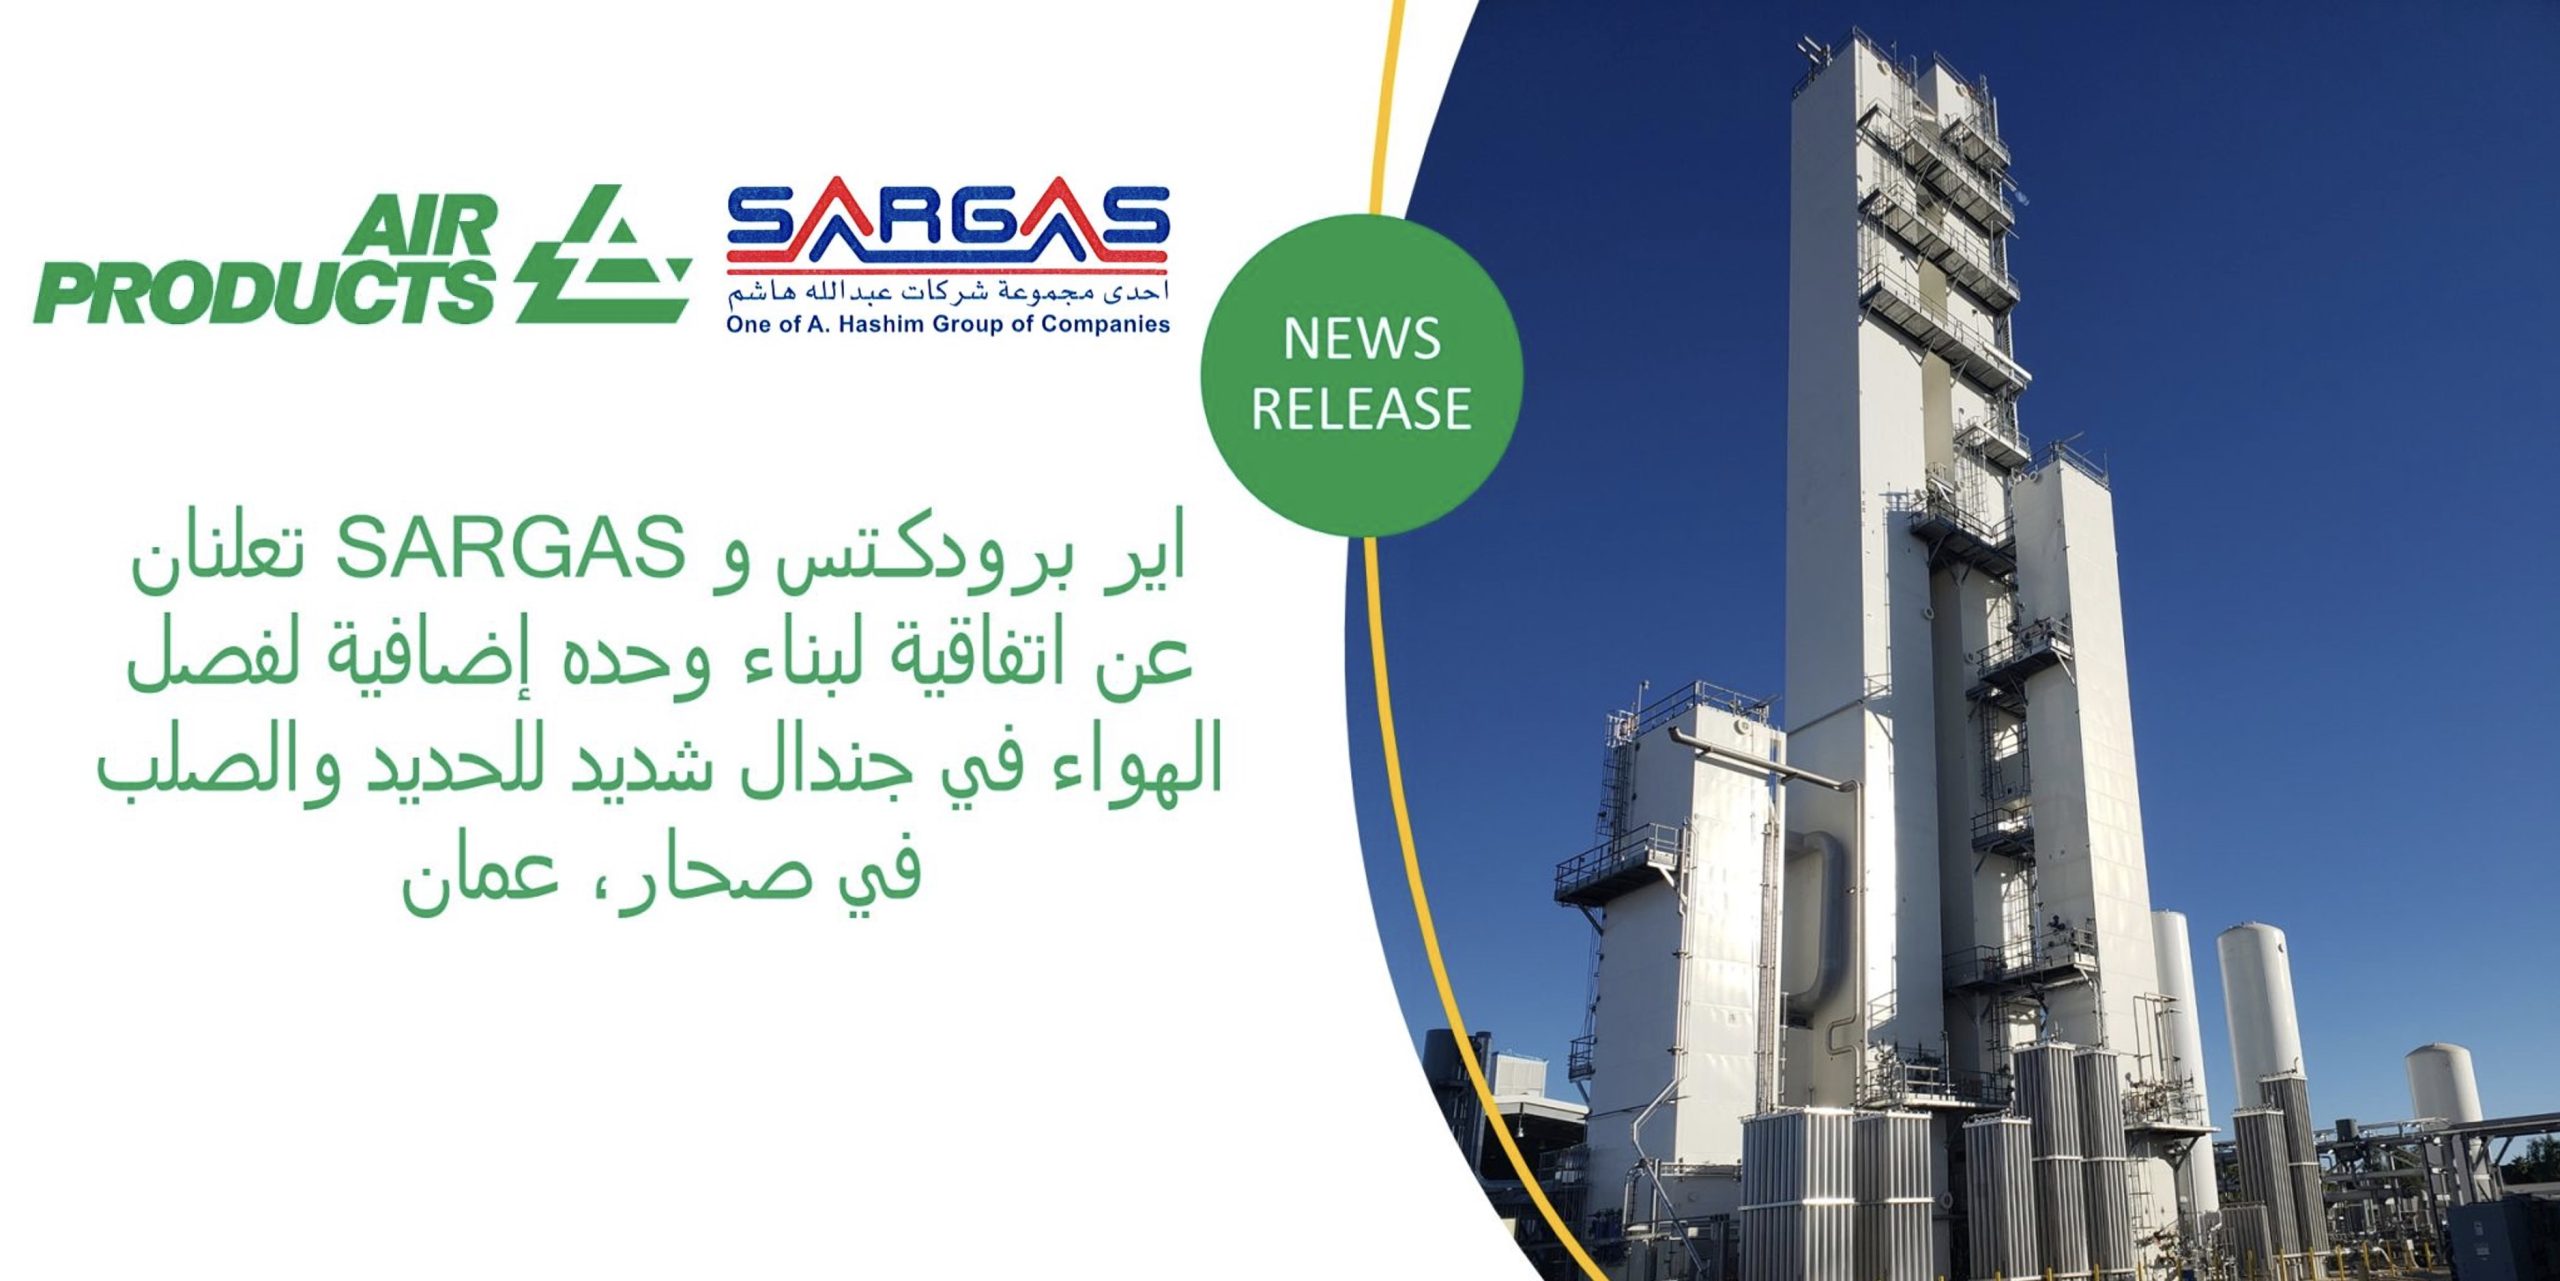 SARGAS and Air Products Announce Agreement to Build Additional Air Separation Unit at Jindal Shadeed Iron & Steel in Sohar, Oman